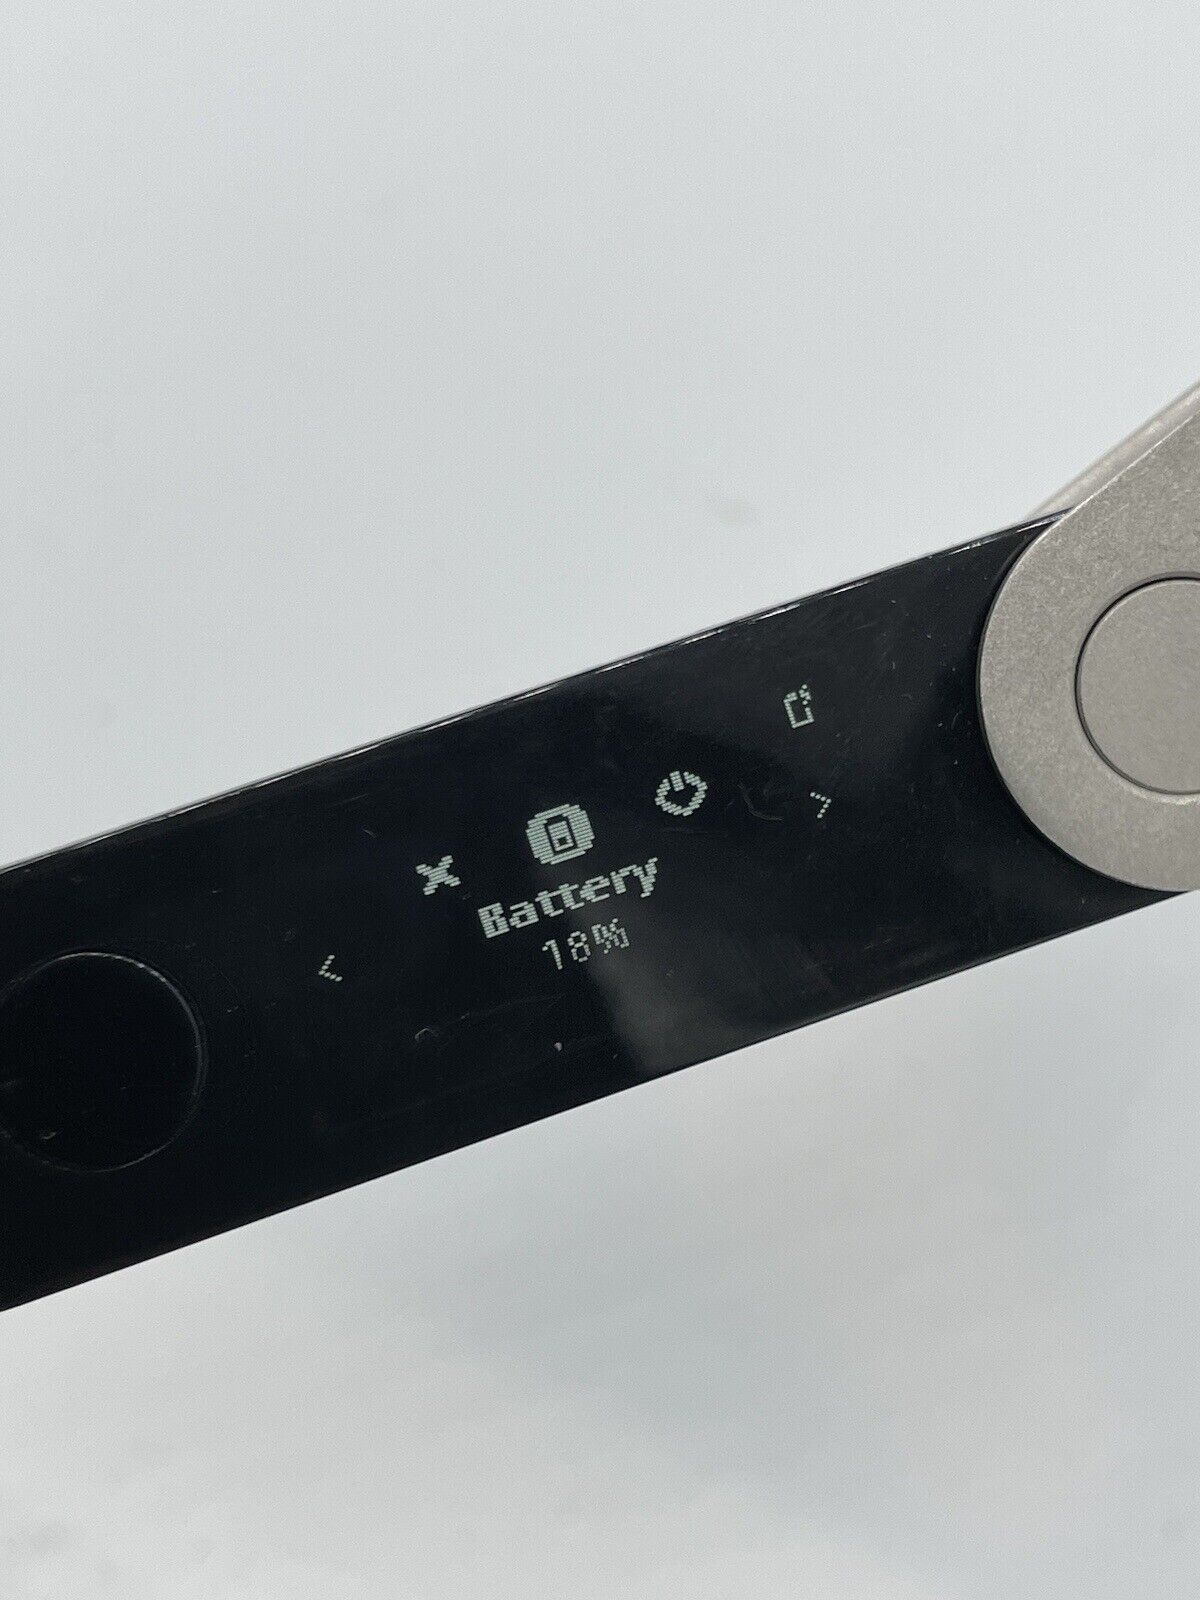 Ledger Nano X Review: Security, Coins, Price & more ()